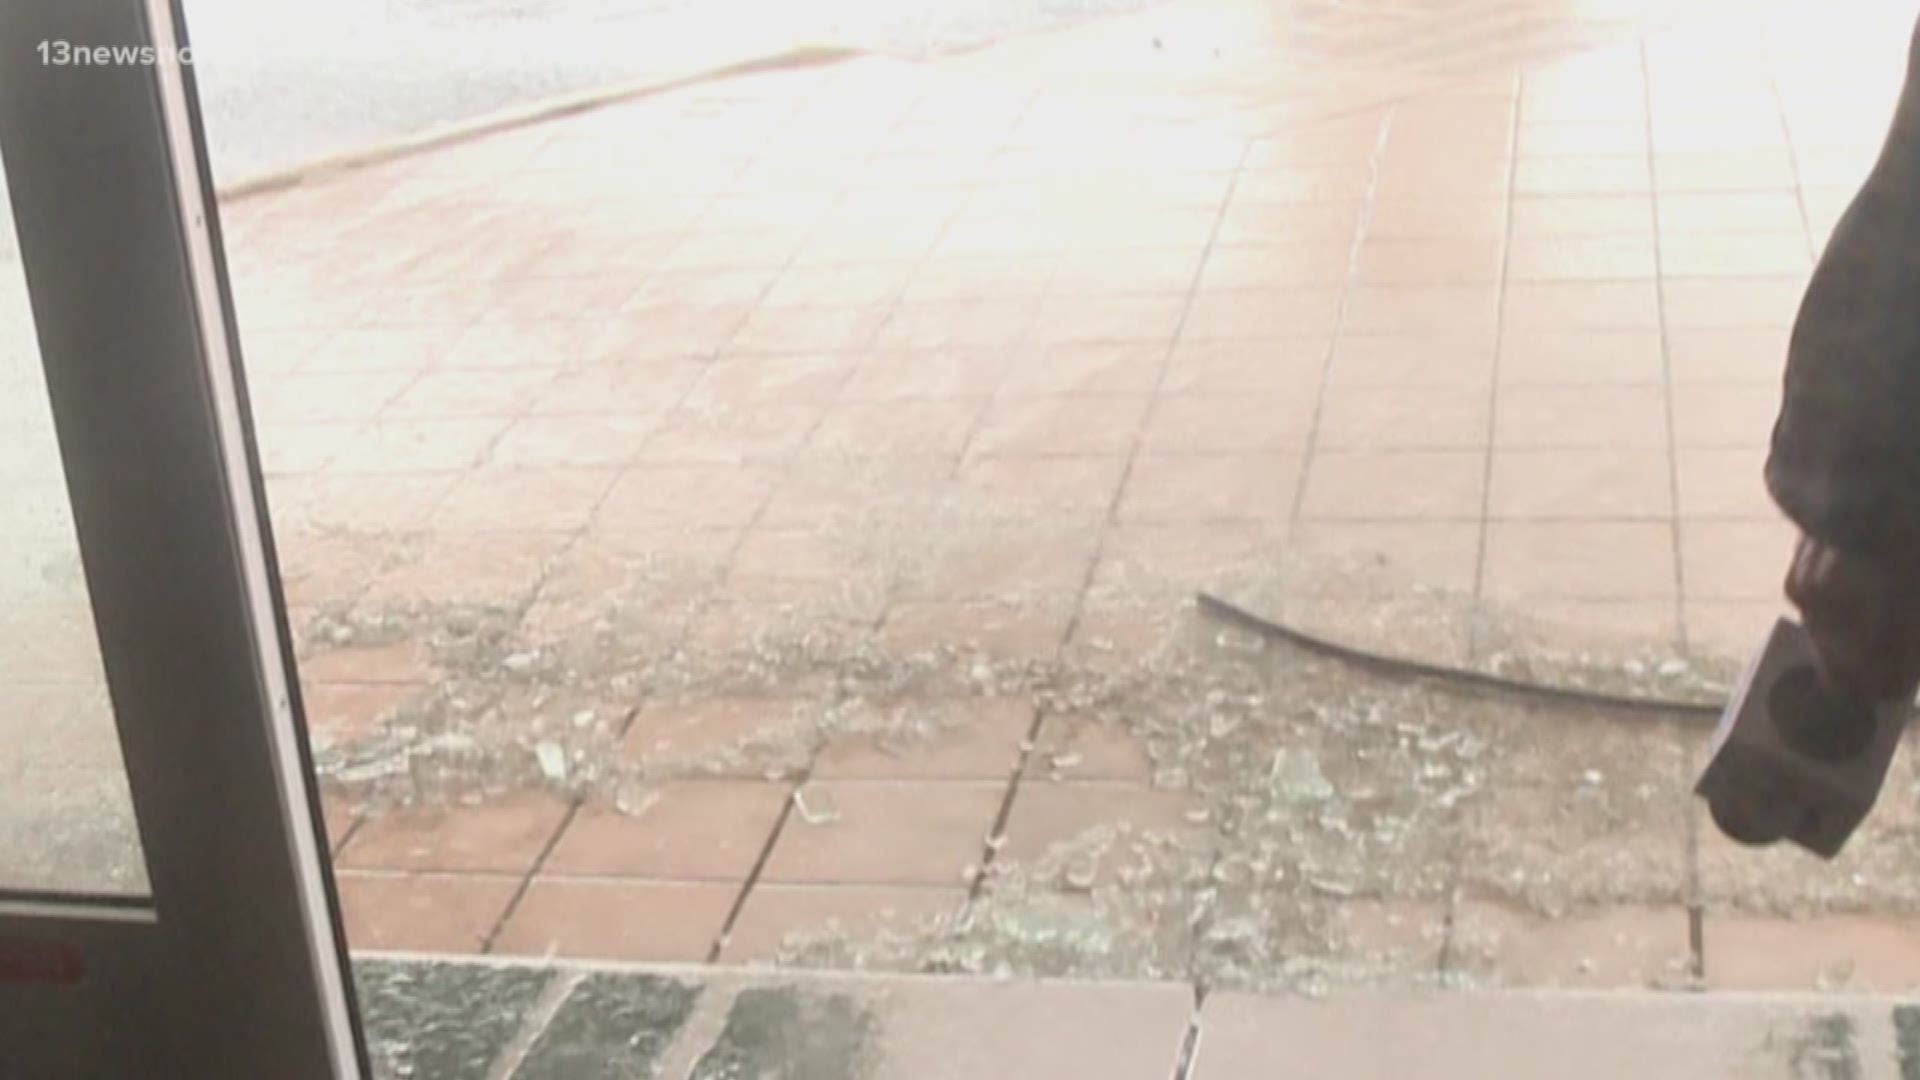 While covering Hurricane Dorian in Nags Head on the Outer Banks of North Carolina, reporter Andy Pierrotti and the photojournalist working with him, Luke Carter, had a glass wall shatter on them. Wind blew it out at the hotel where they were staying. The explosion of glass came as they were getting ready to go live.